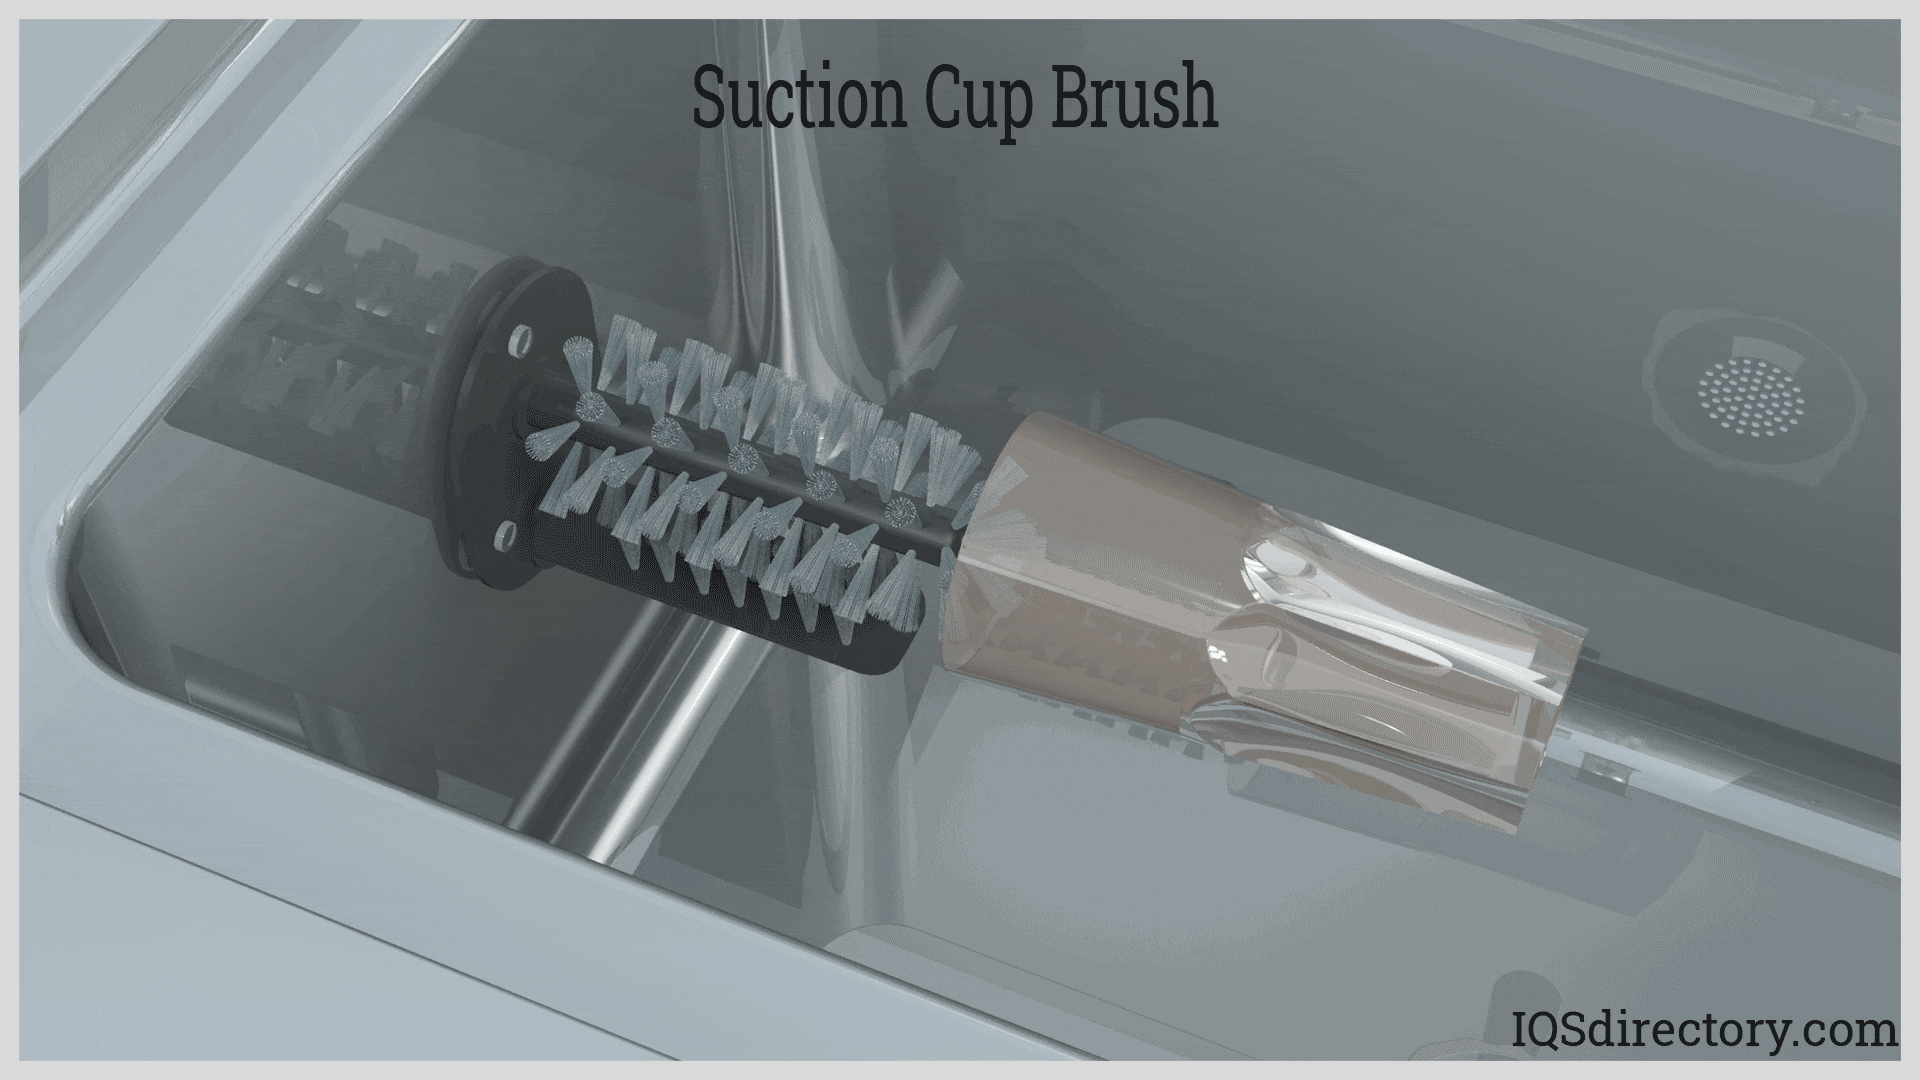 What Are Cup Brushes? Its Manufacturing Process And Applications